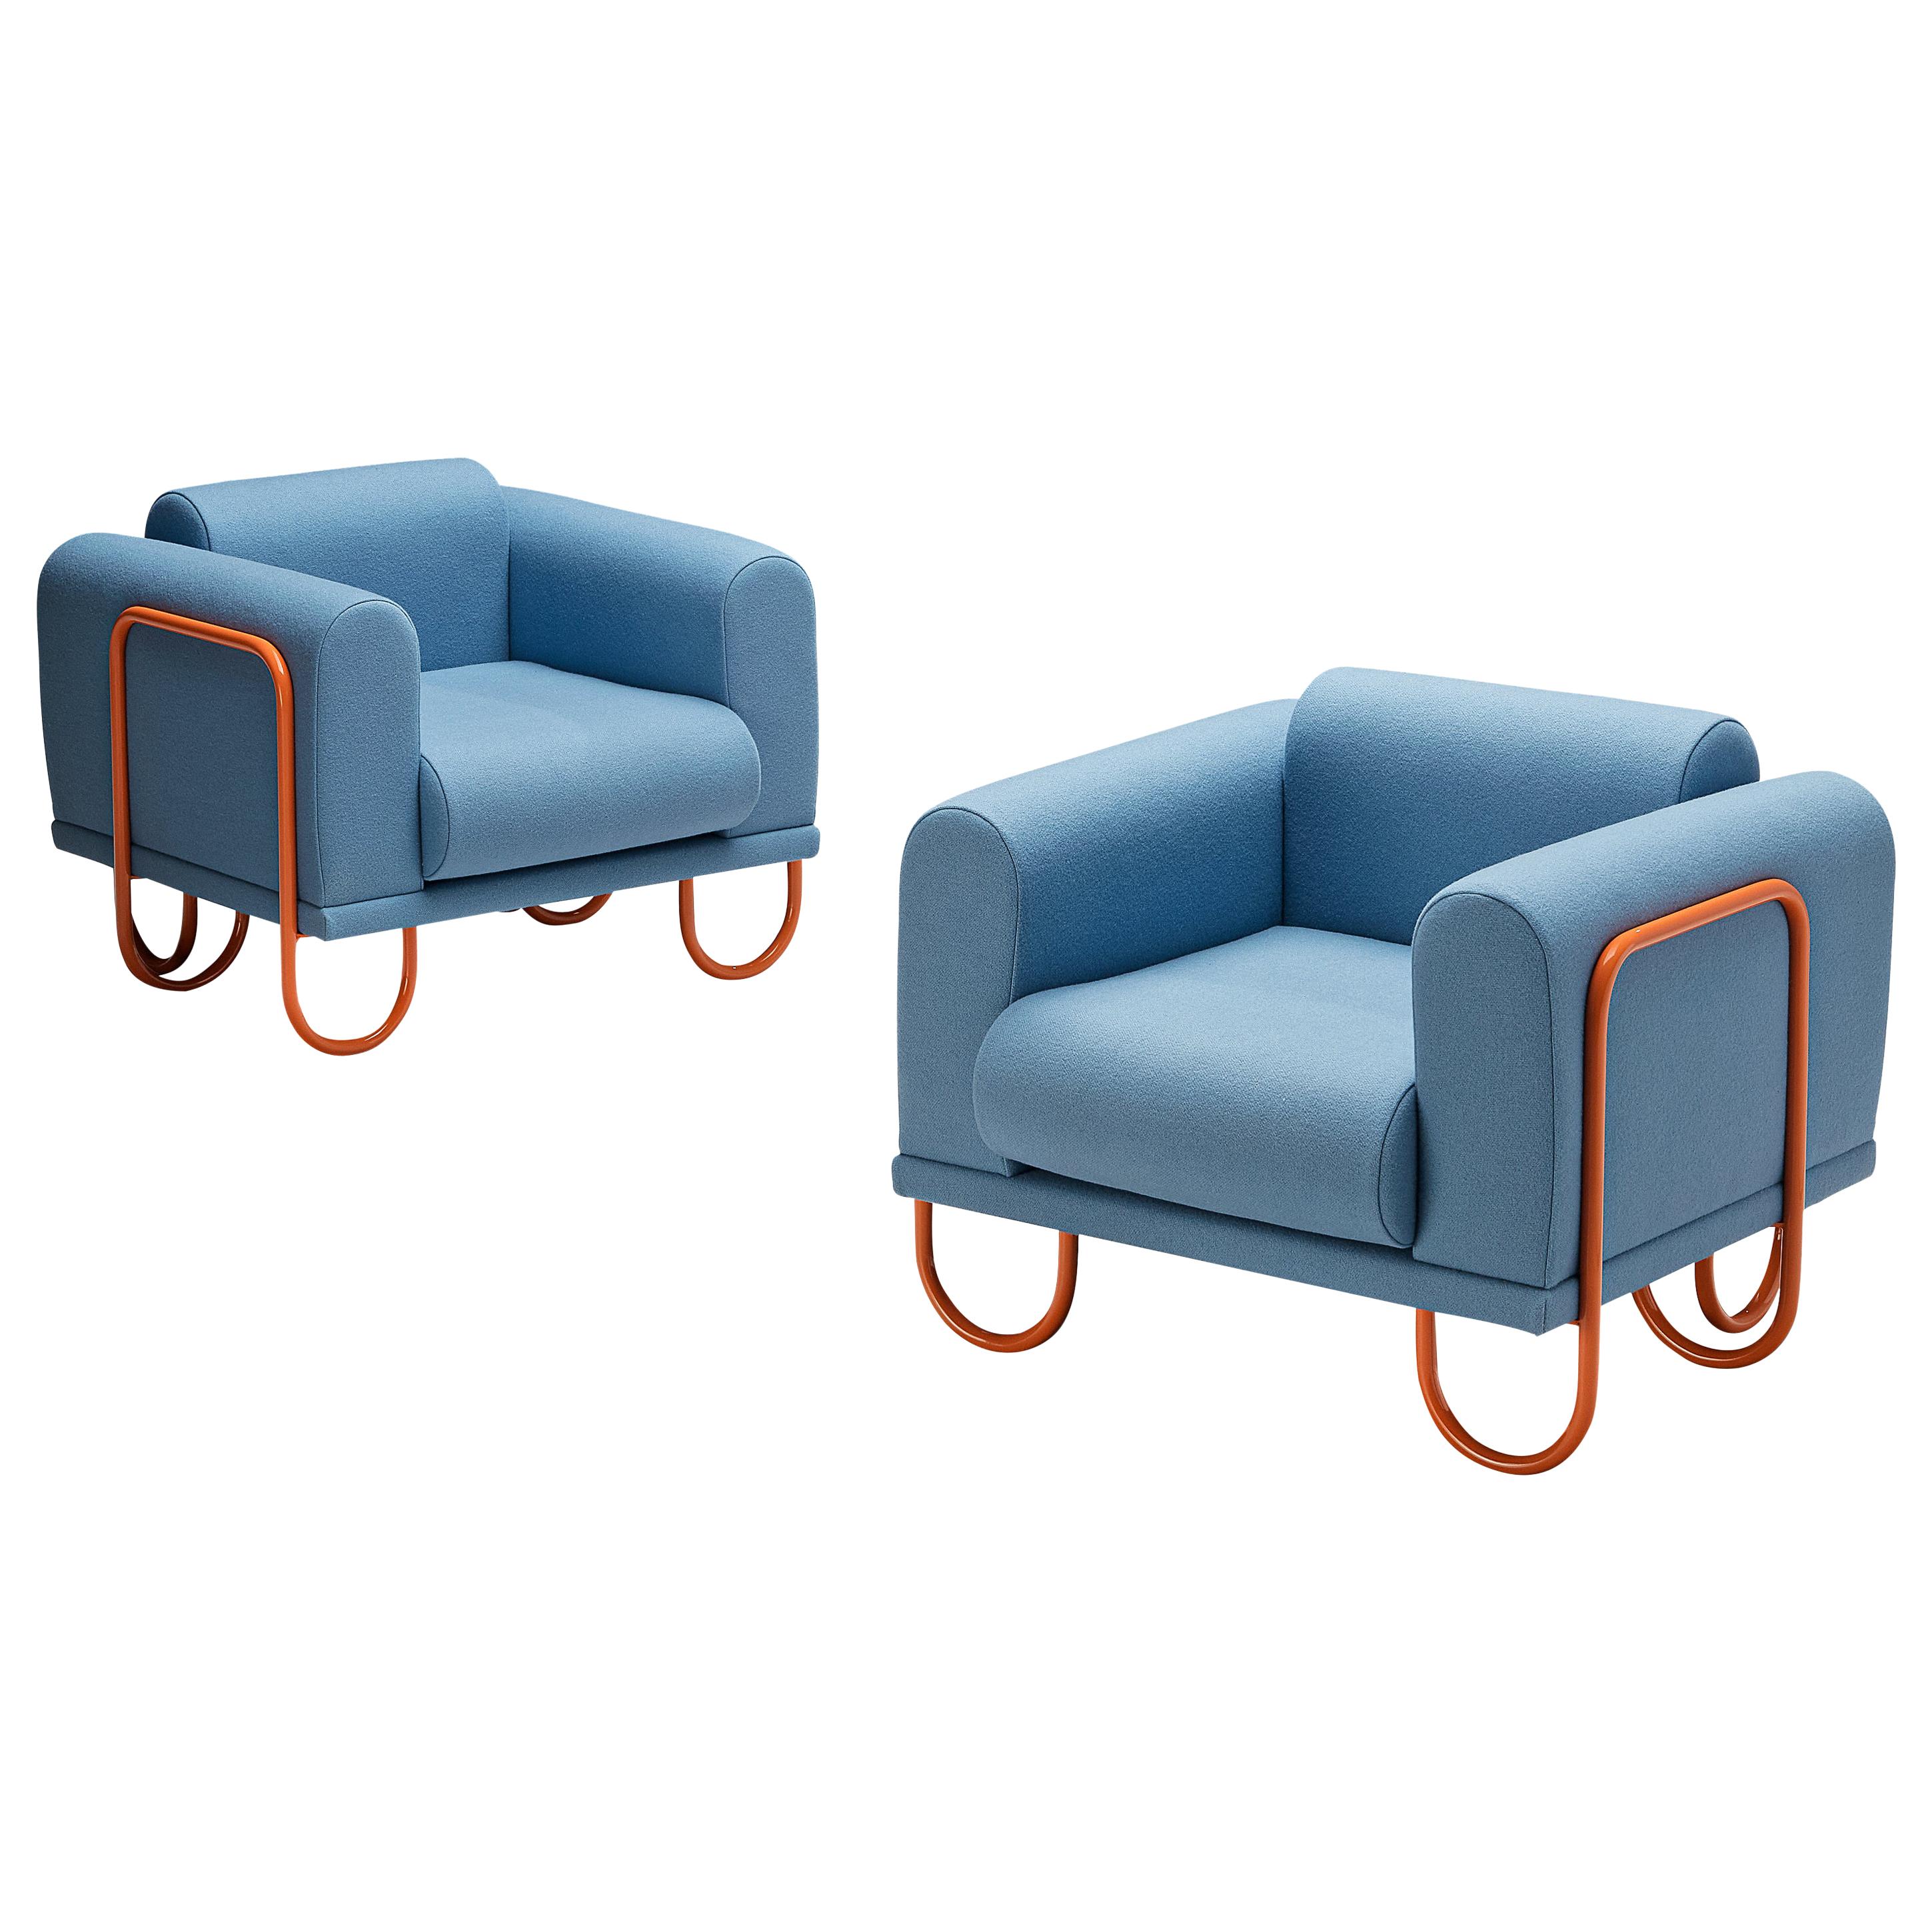 Customizable French Lounge Chairs with Tubular Frames